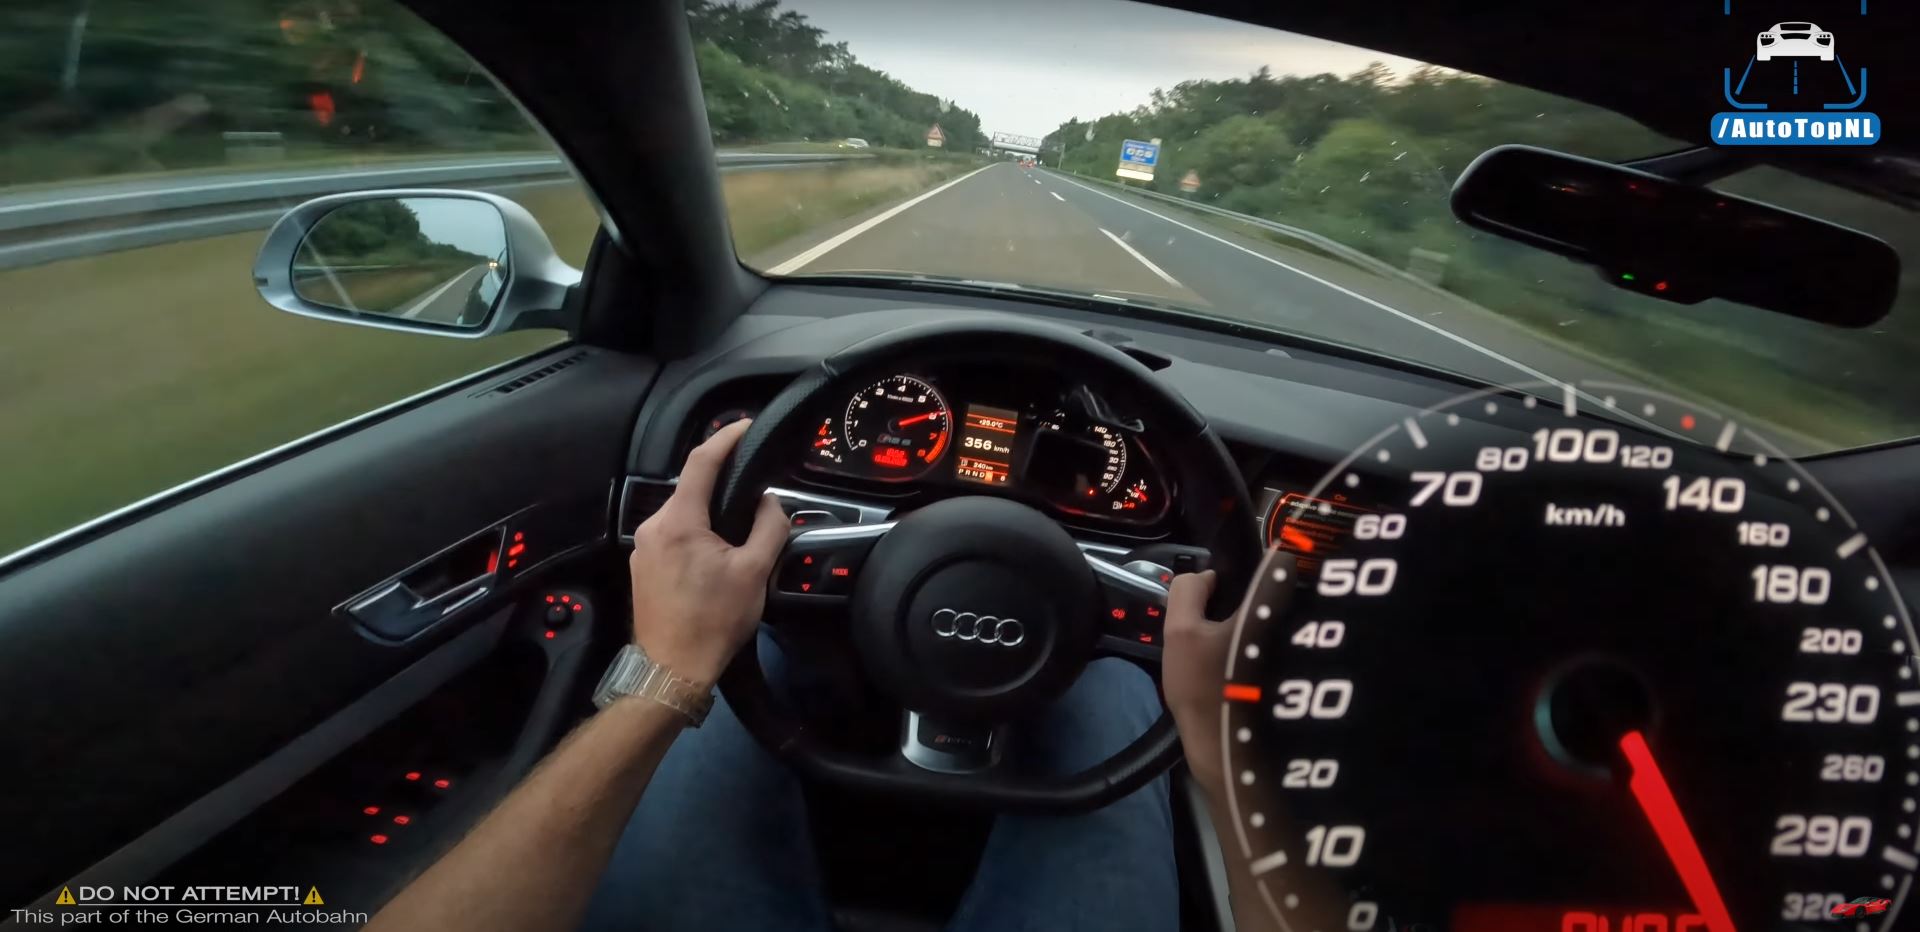 780-HP Audi RS 6 Goes for a Top on the Autobahn, Exceeds 220 MPH -